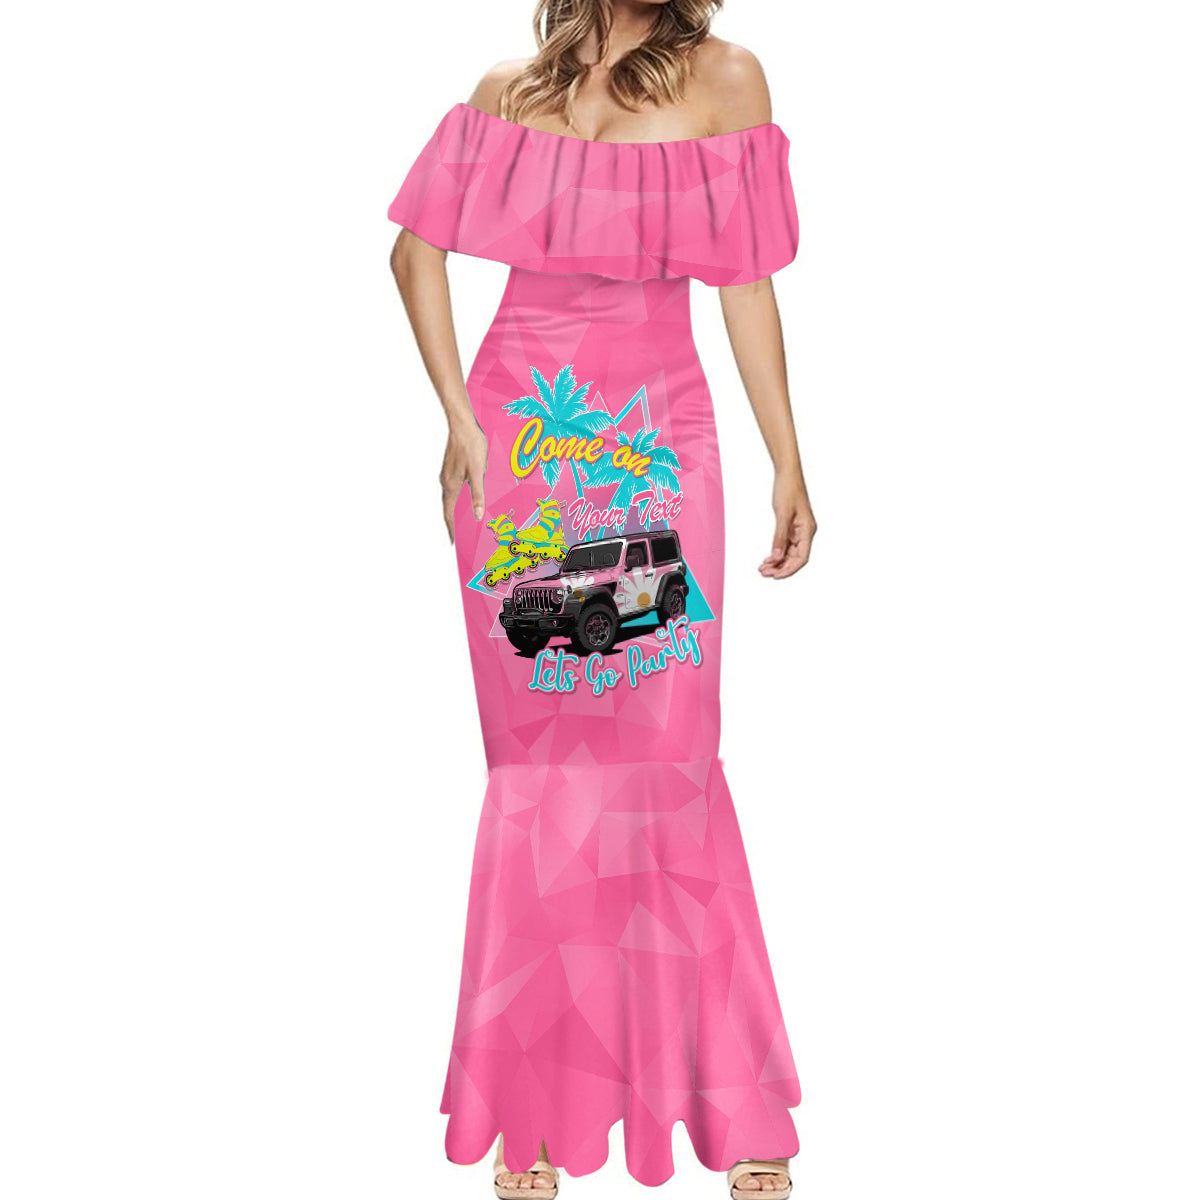 personalised-jeep-girl-mermaid-dress-doll-pink-party